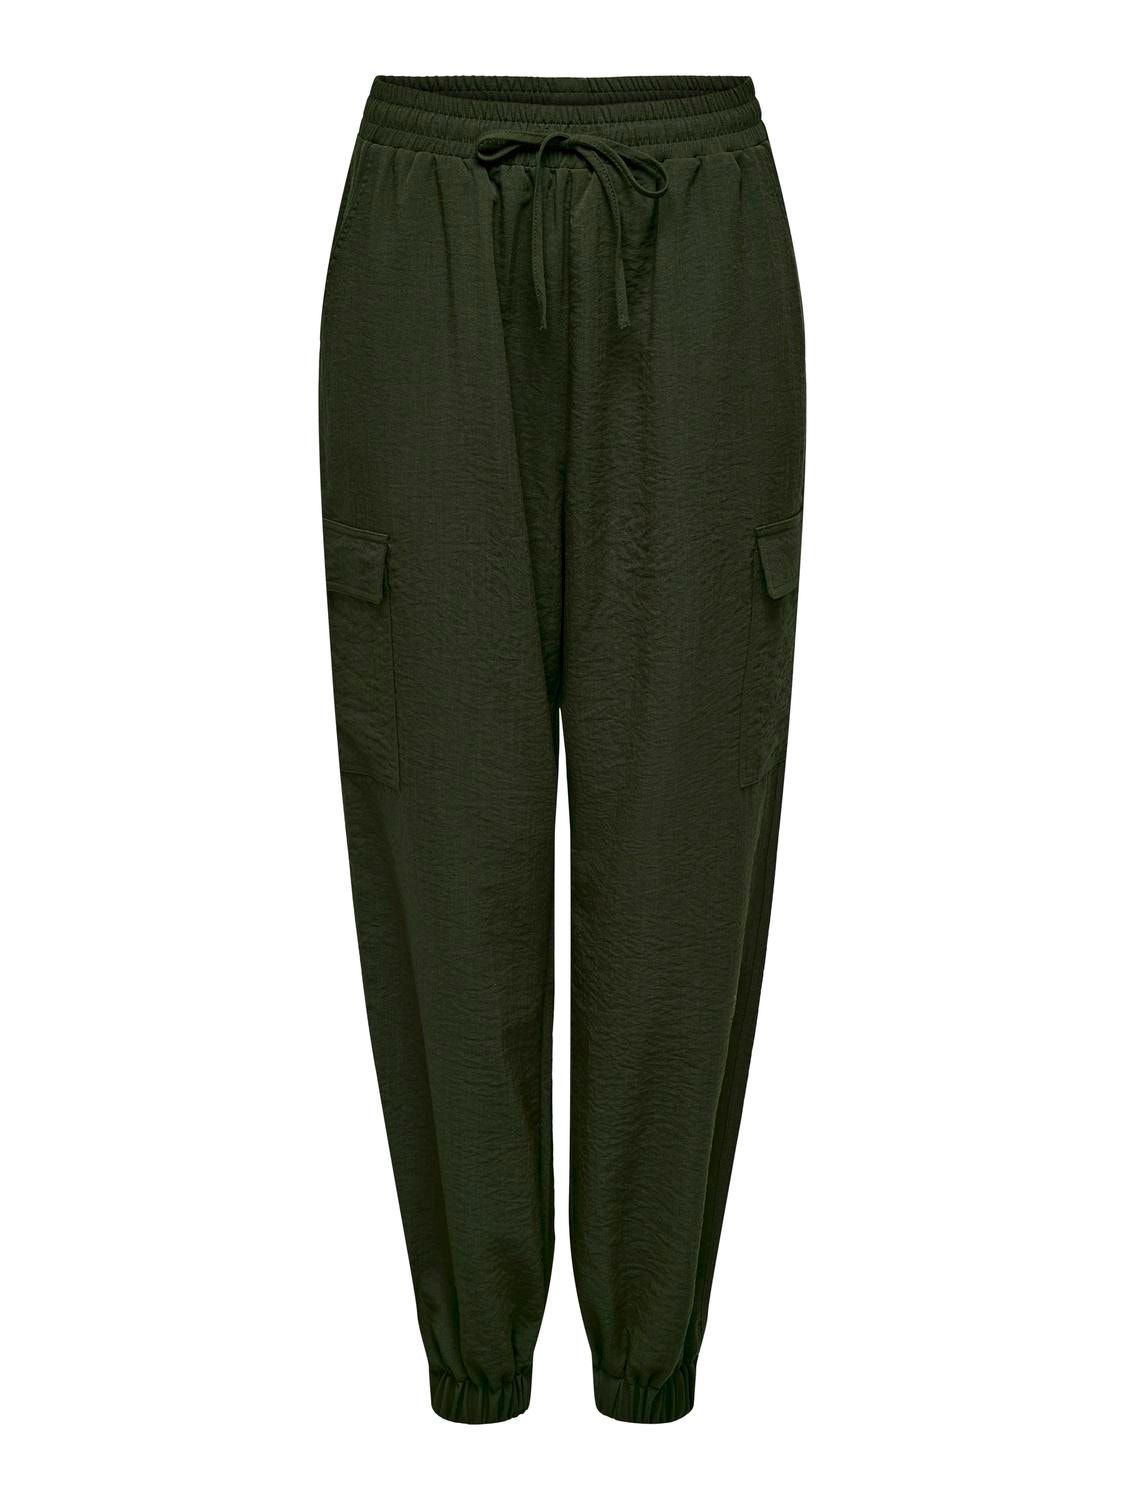 ONLY Cargo trousers with high waist -Forest Night - 15301008